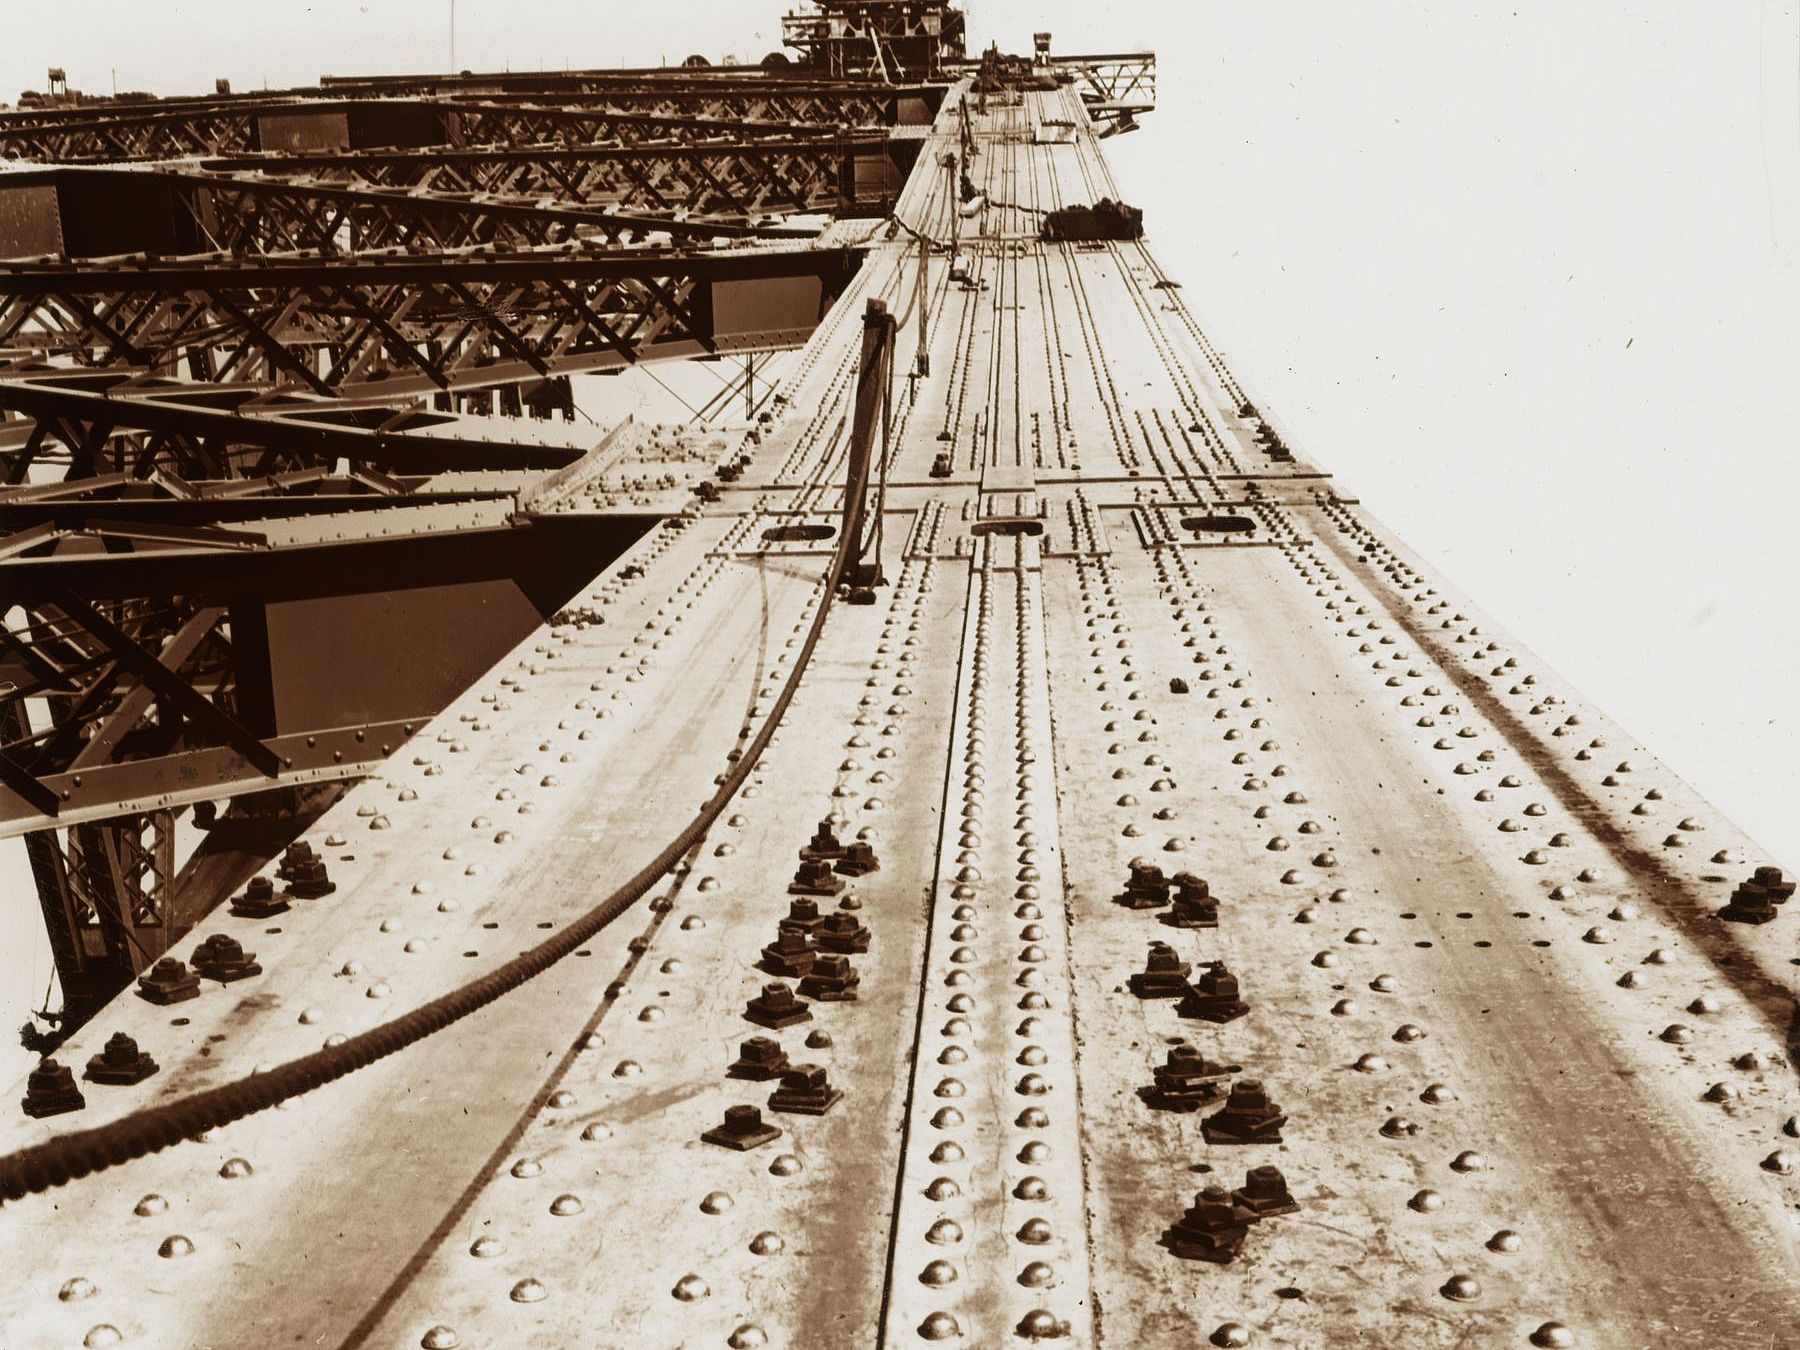 Looking up the top chord of the arch, photo and slide by Rev. Frank Cash. Item 02: Box 7 Slides of Harbour Bridge during construction, ca. 1930-1932
